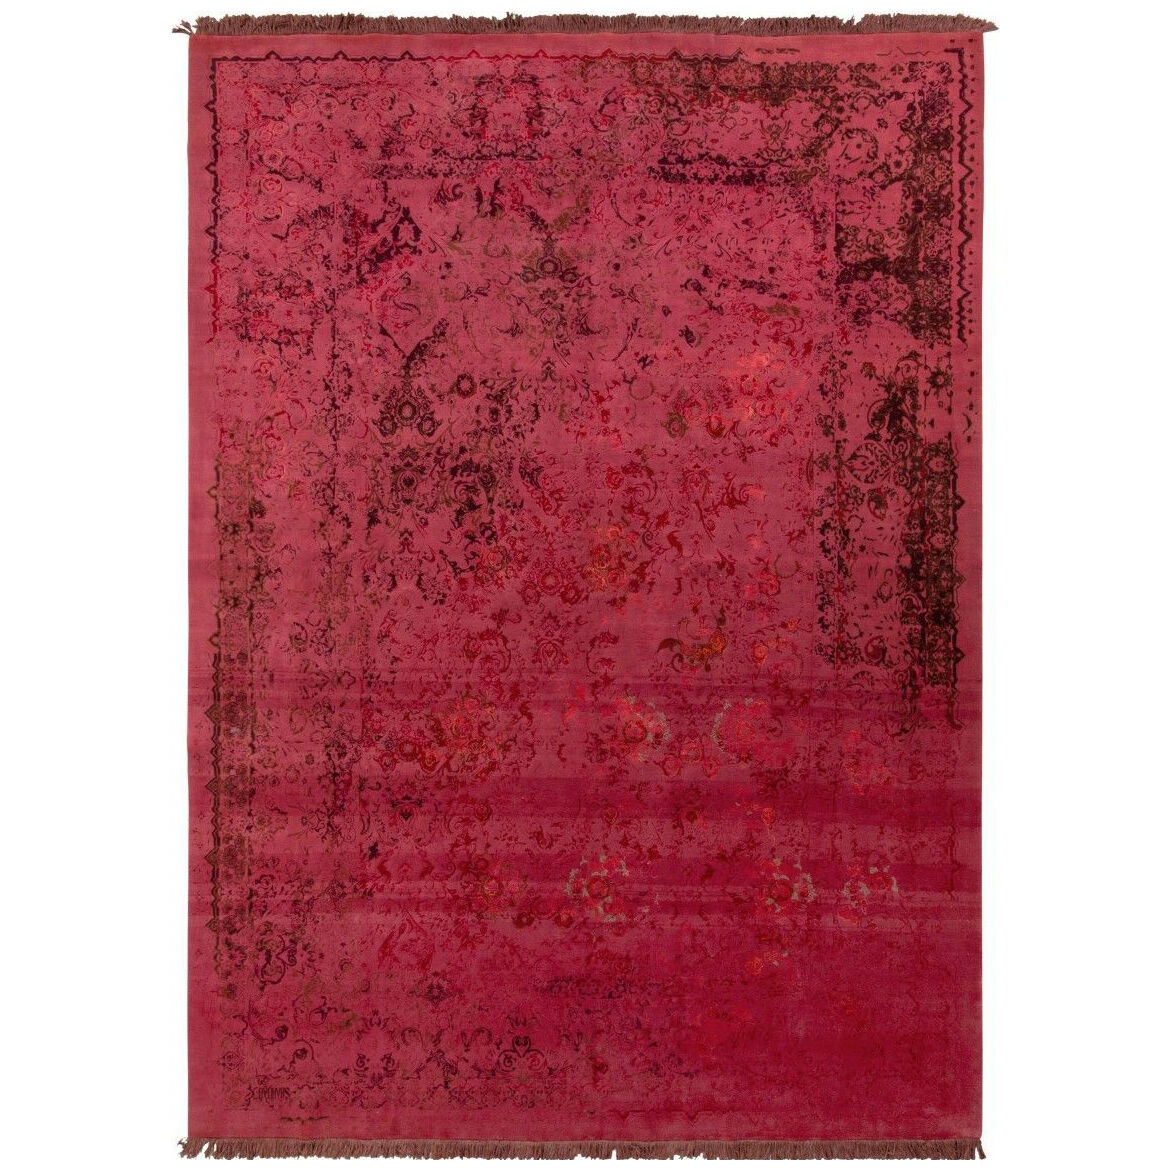 A stunning rose-red Iranian rug by Rug & Kilim - Effect Magazine